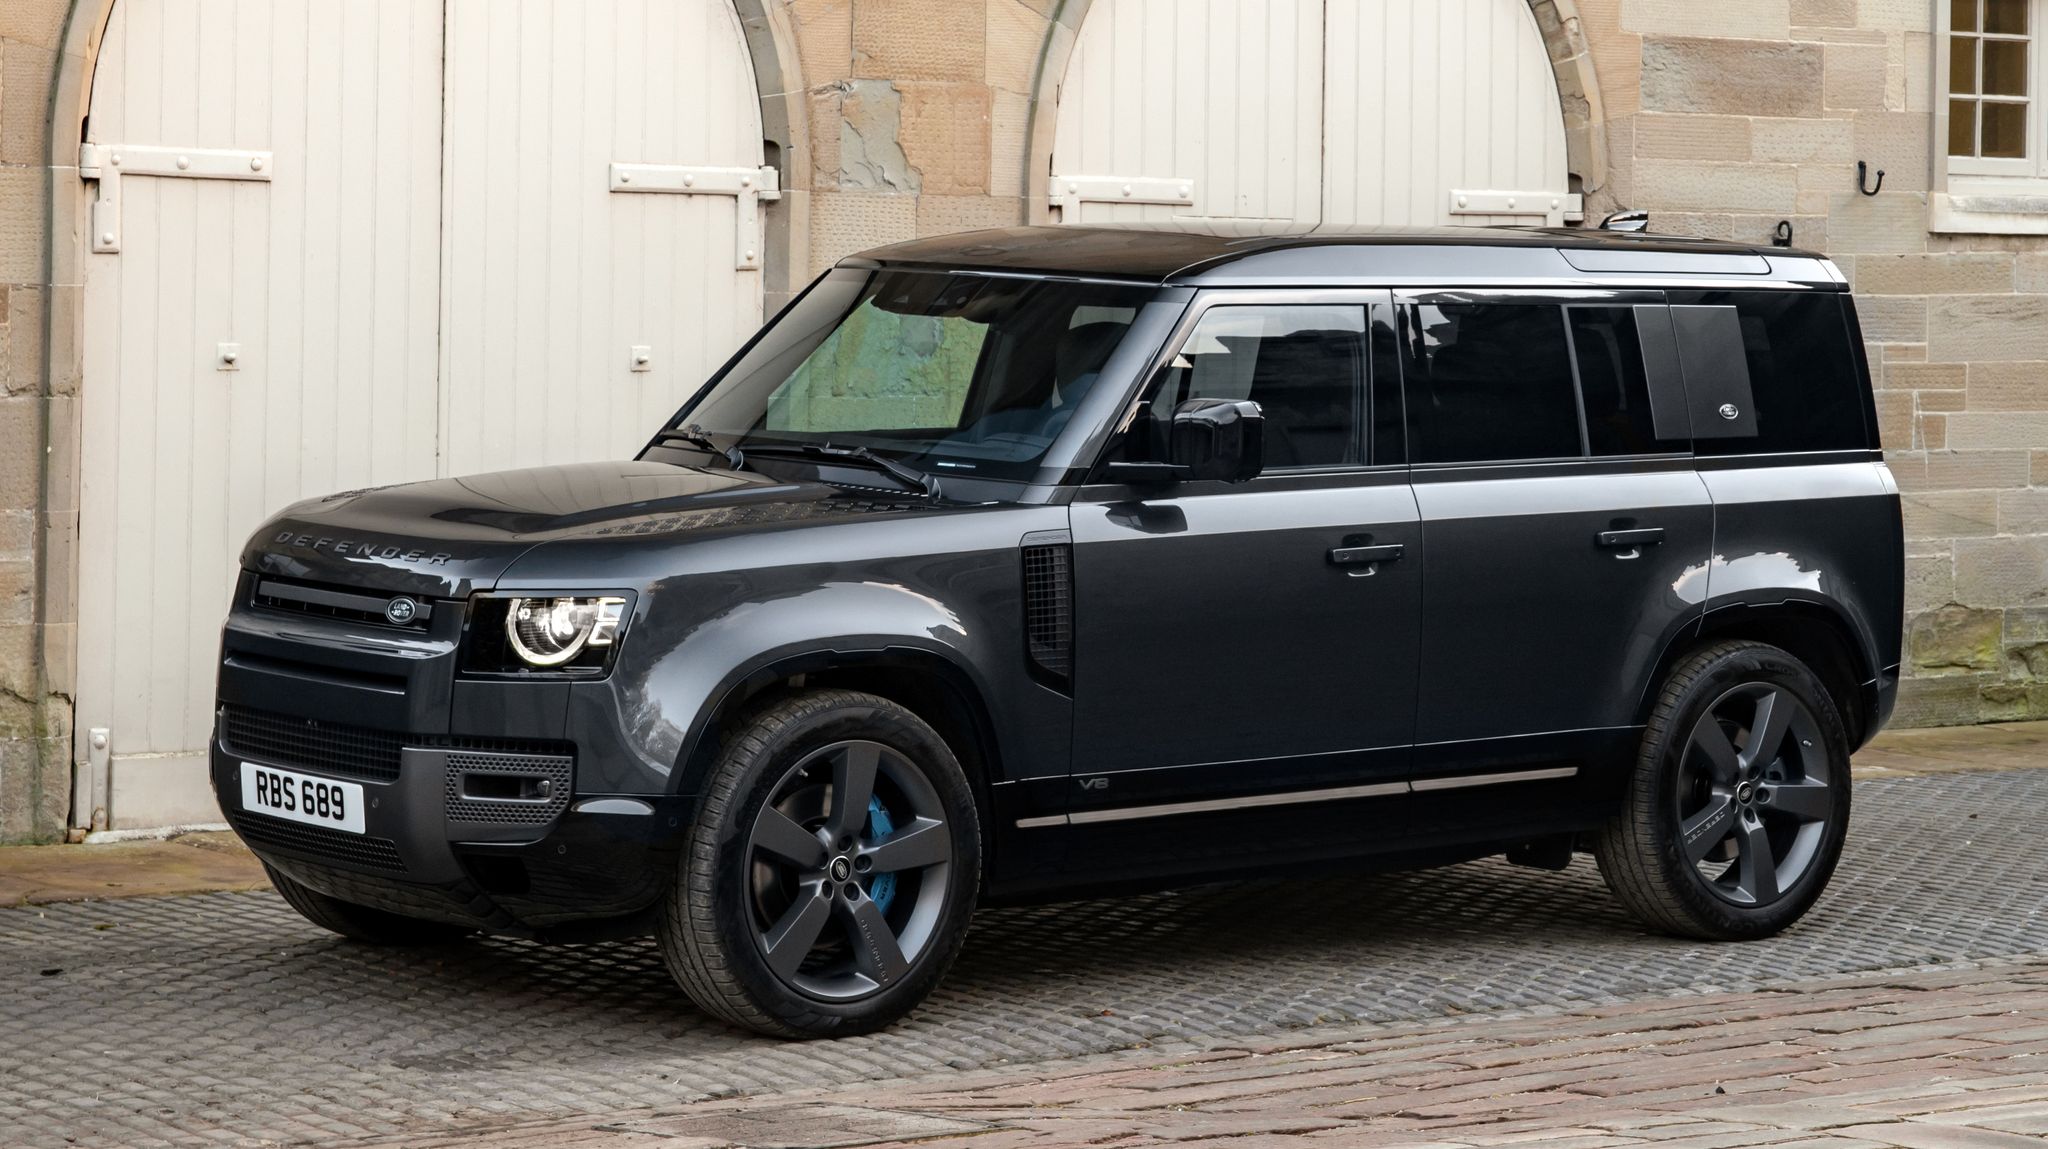 NEW 2022 Land Rover Defender lease at AutoLux sales and leasing